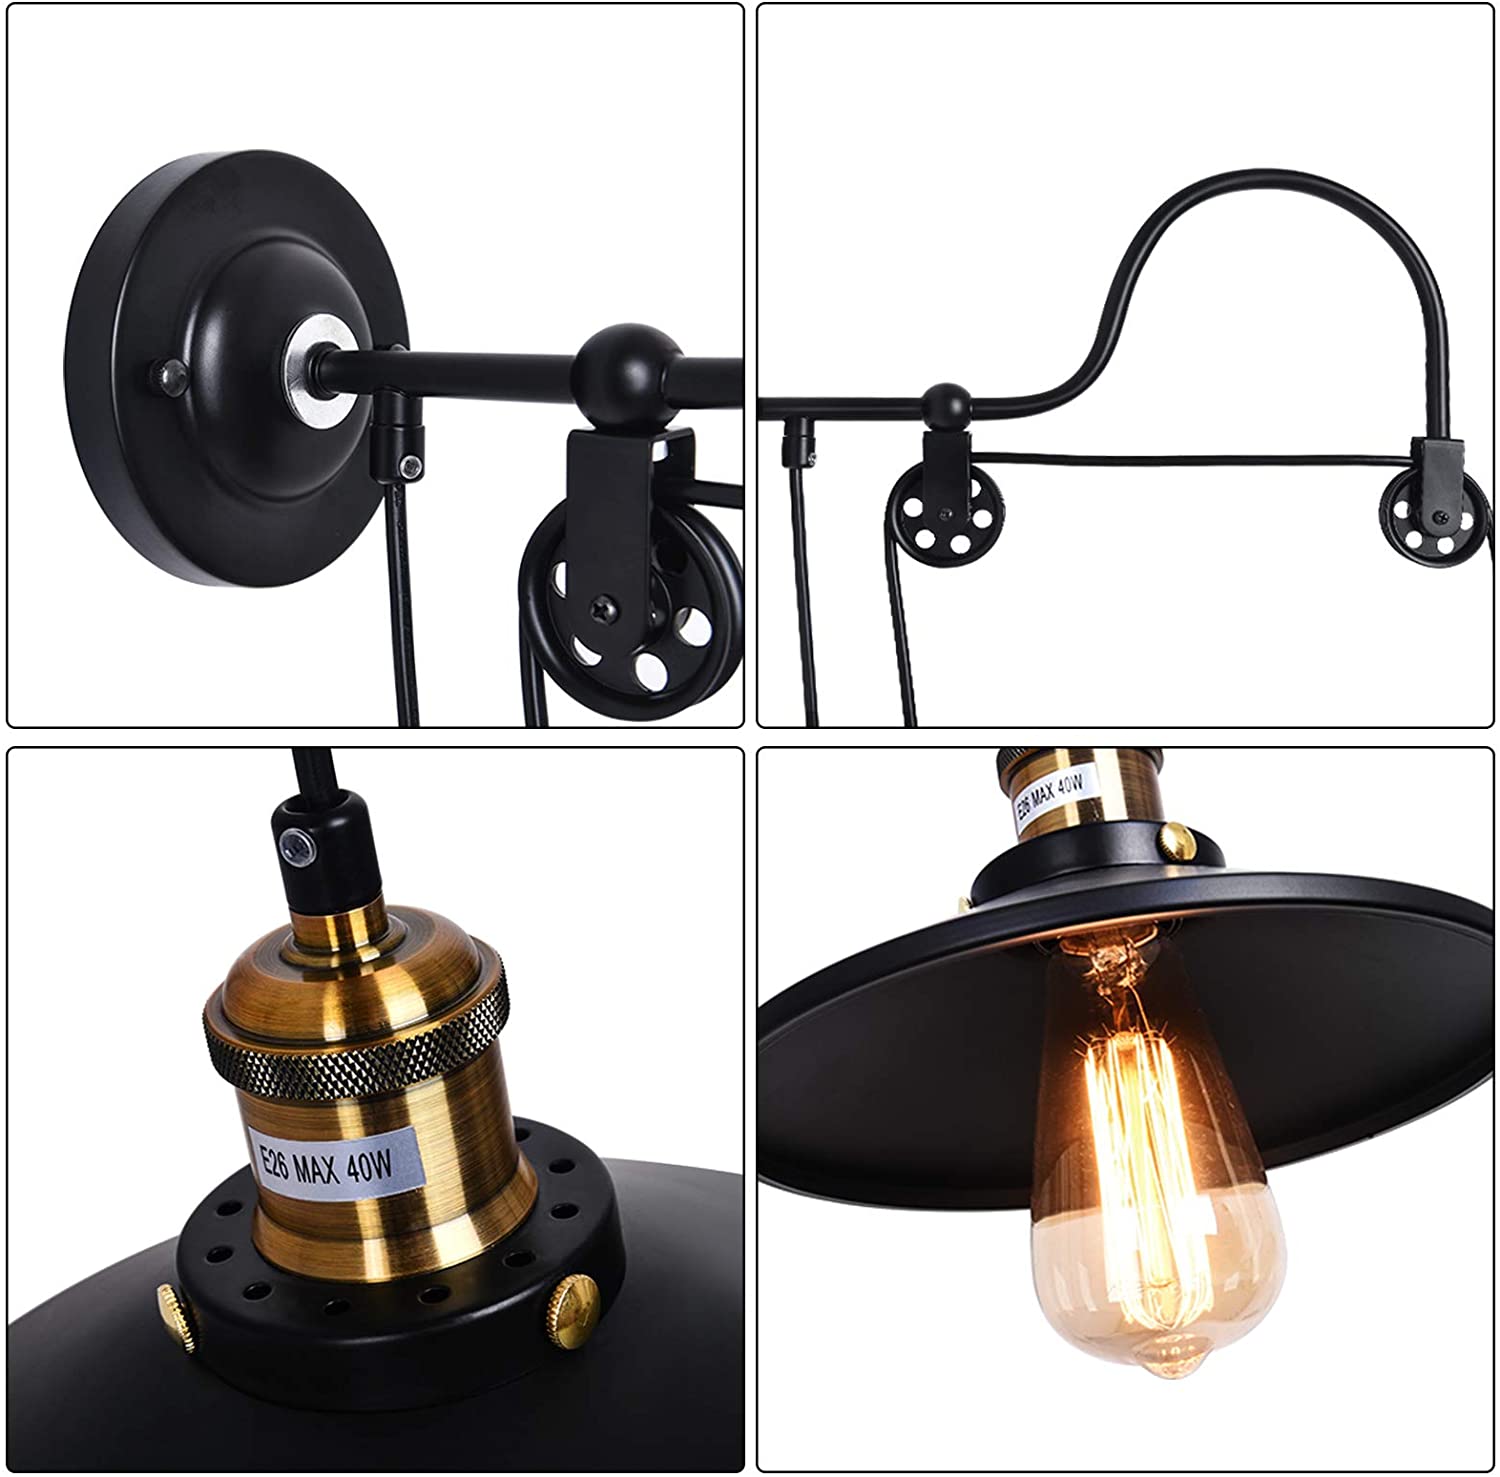 Pulley gooseneck industrial wall light fixture black adjustable wall mounted sconce